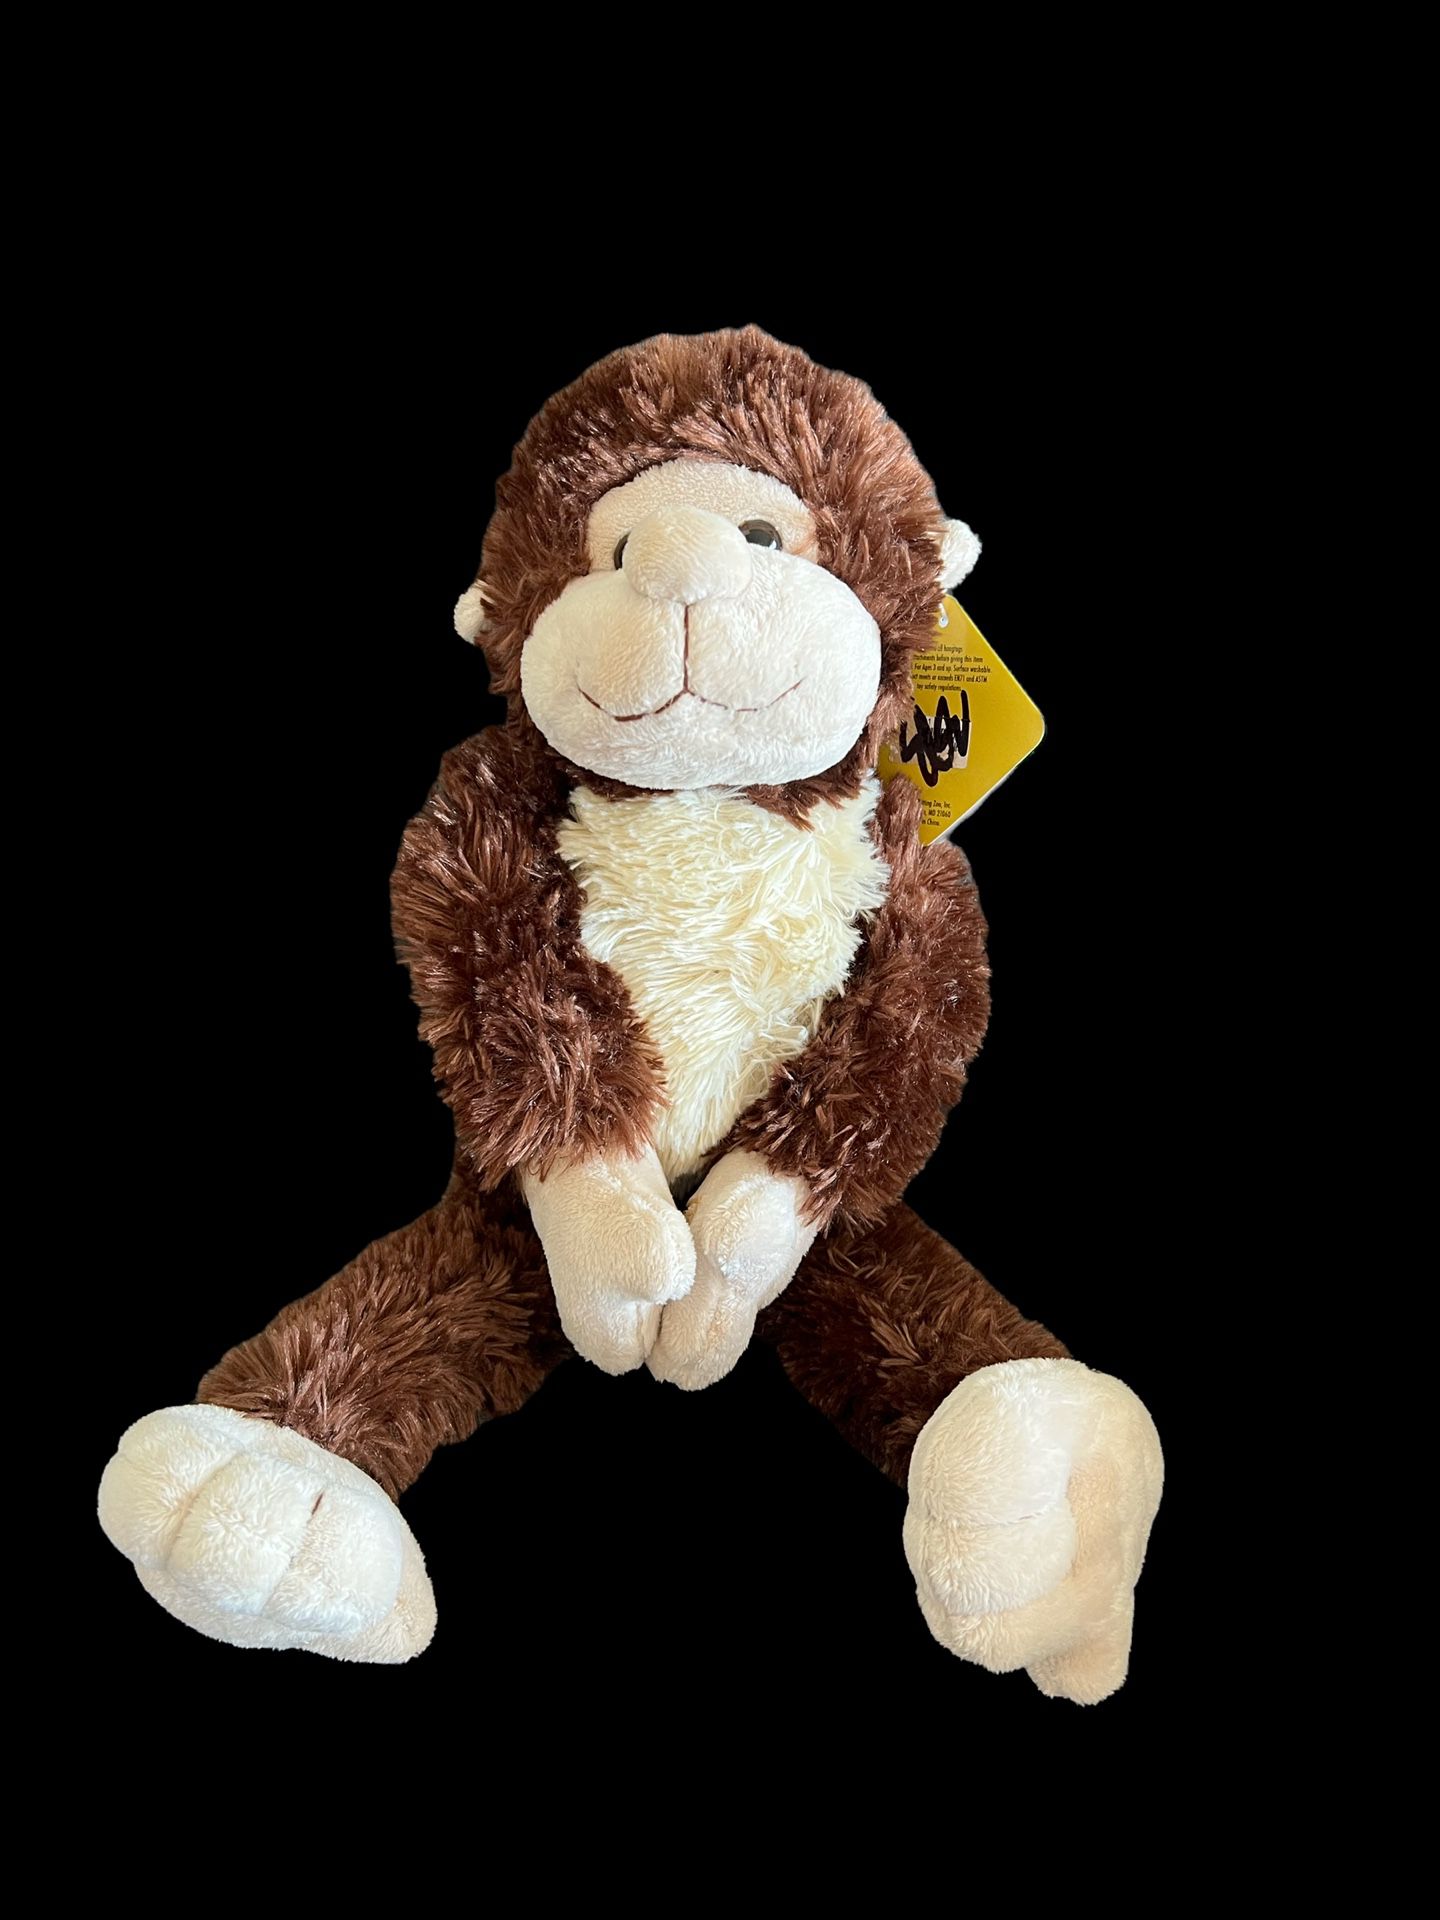 The Petting Zoo Monkey Plush Stuffed Animal Toy Wildlife Collection 16".  Has tags attached attached to it .  Comes from pet and smoke free household.